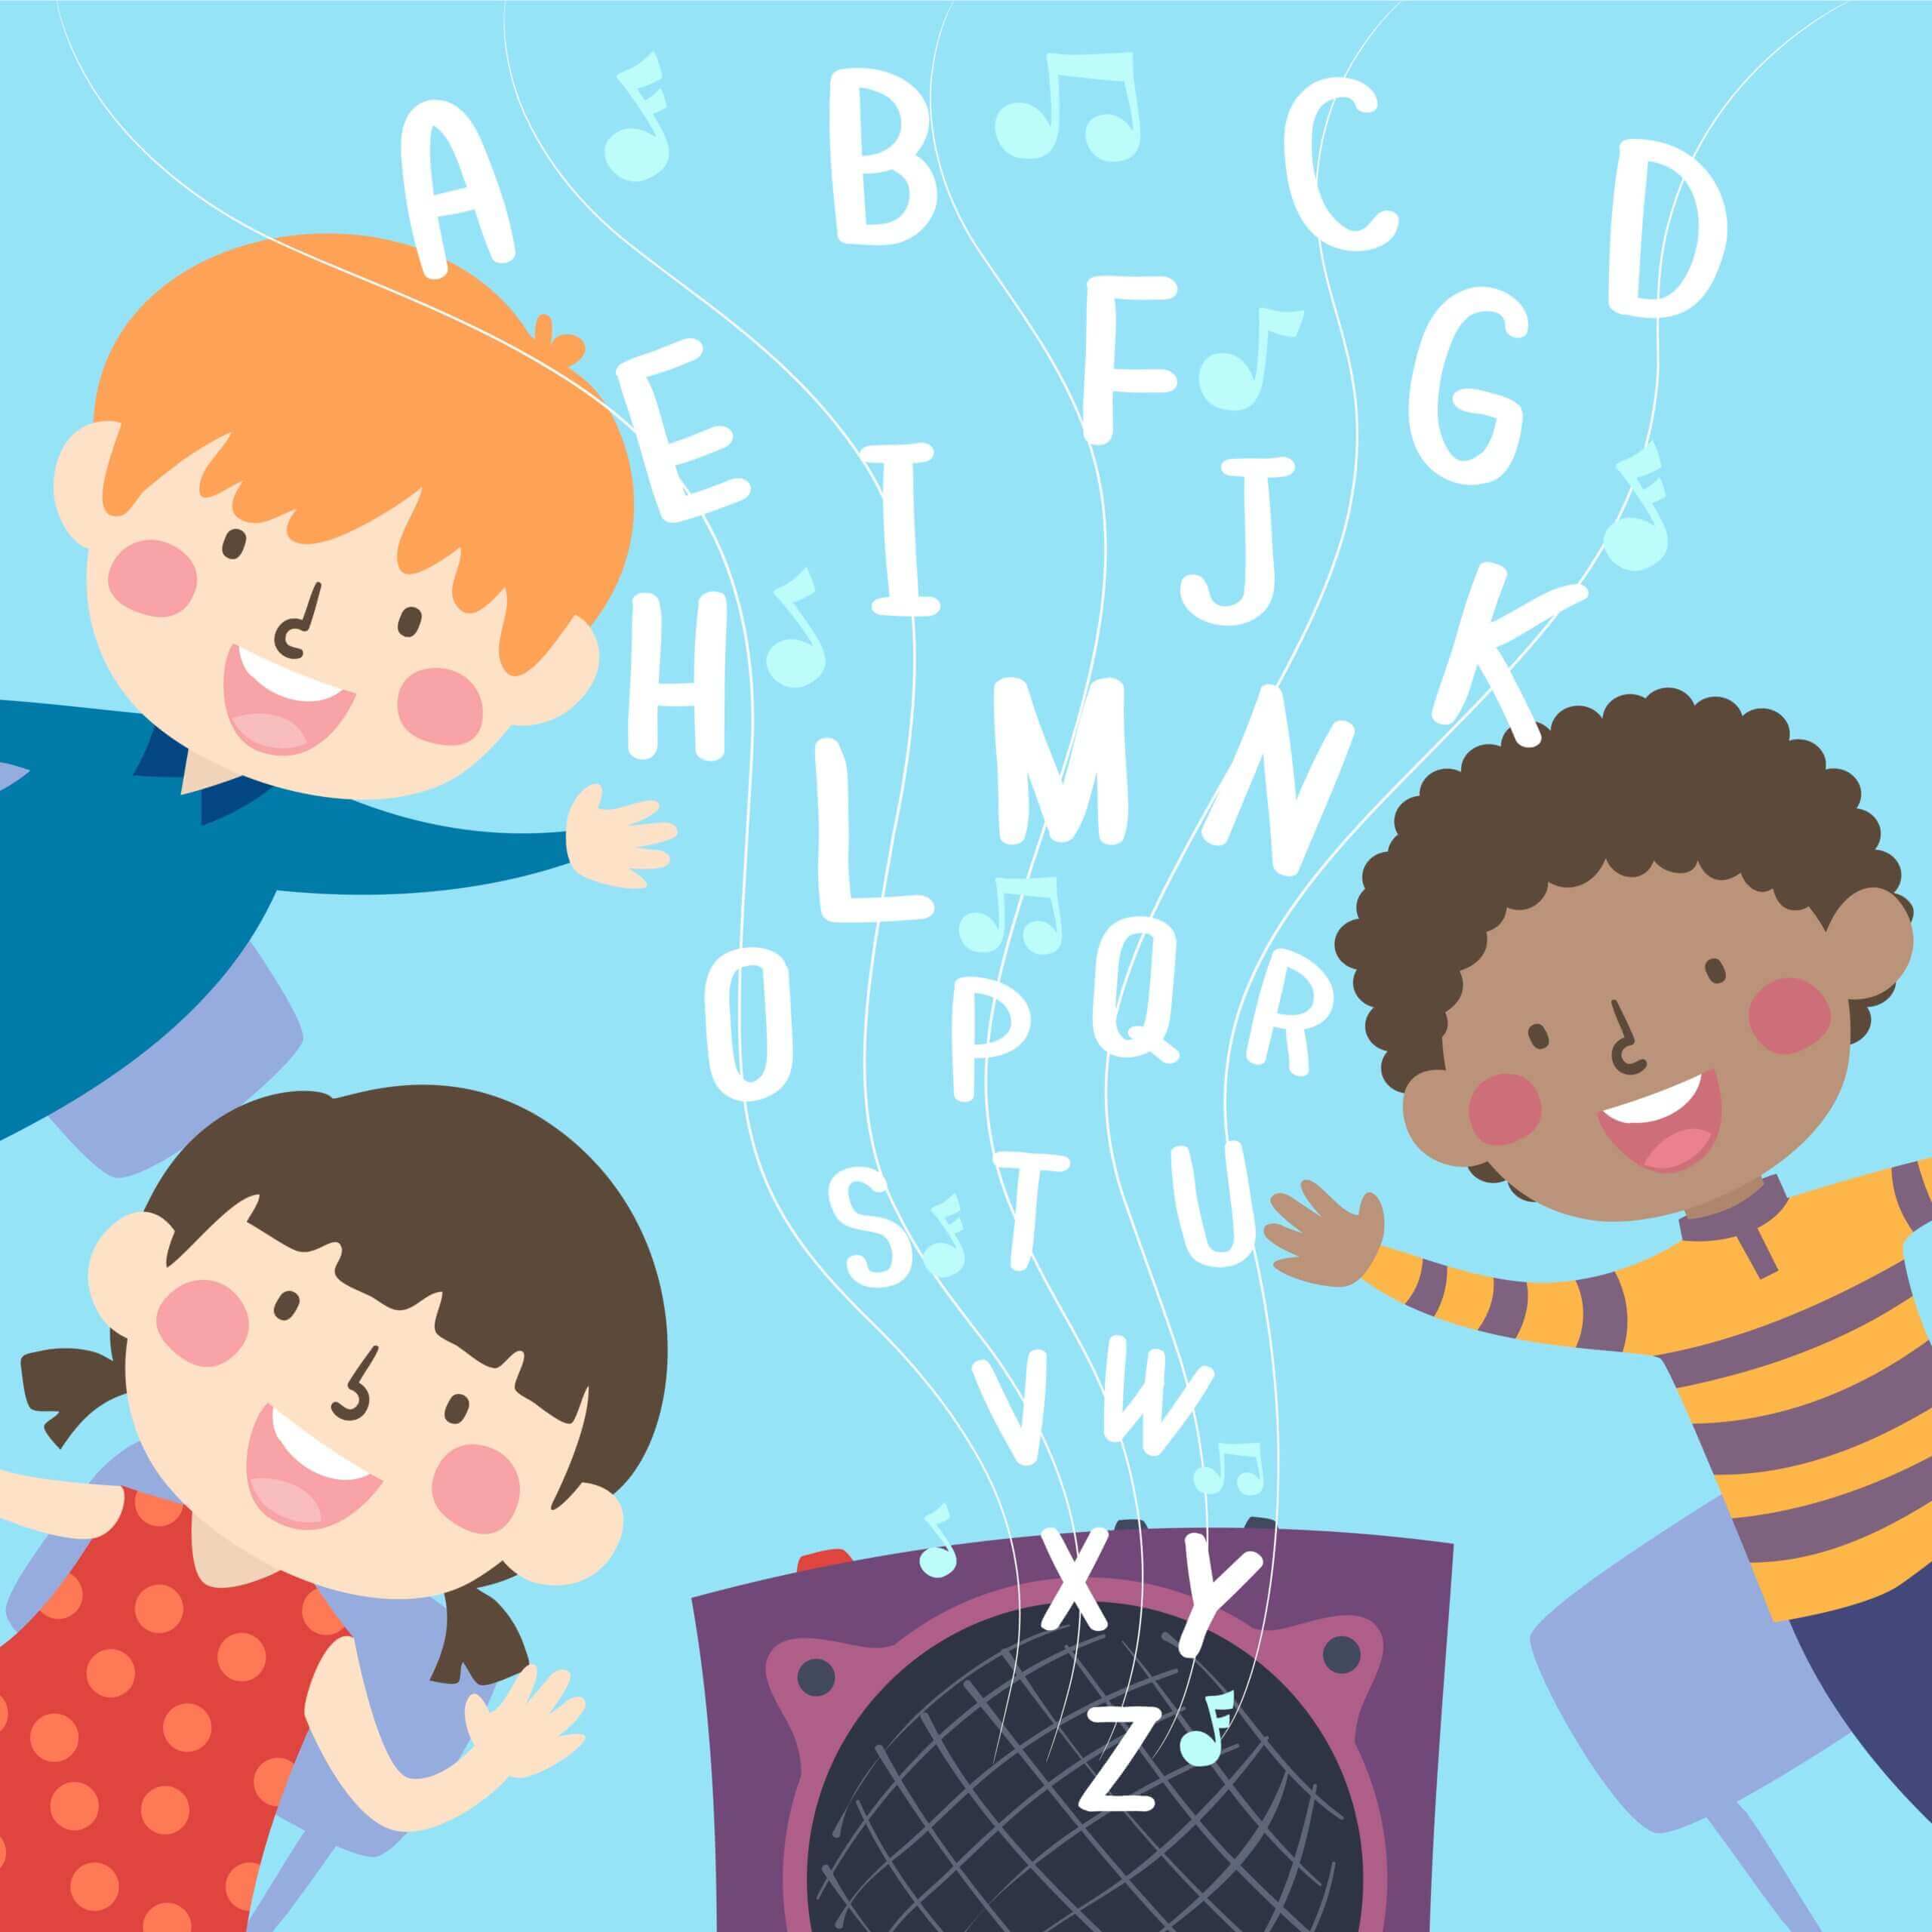 A cartoon image of children smiling as alphabet letters come out of a speaker.